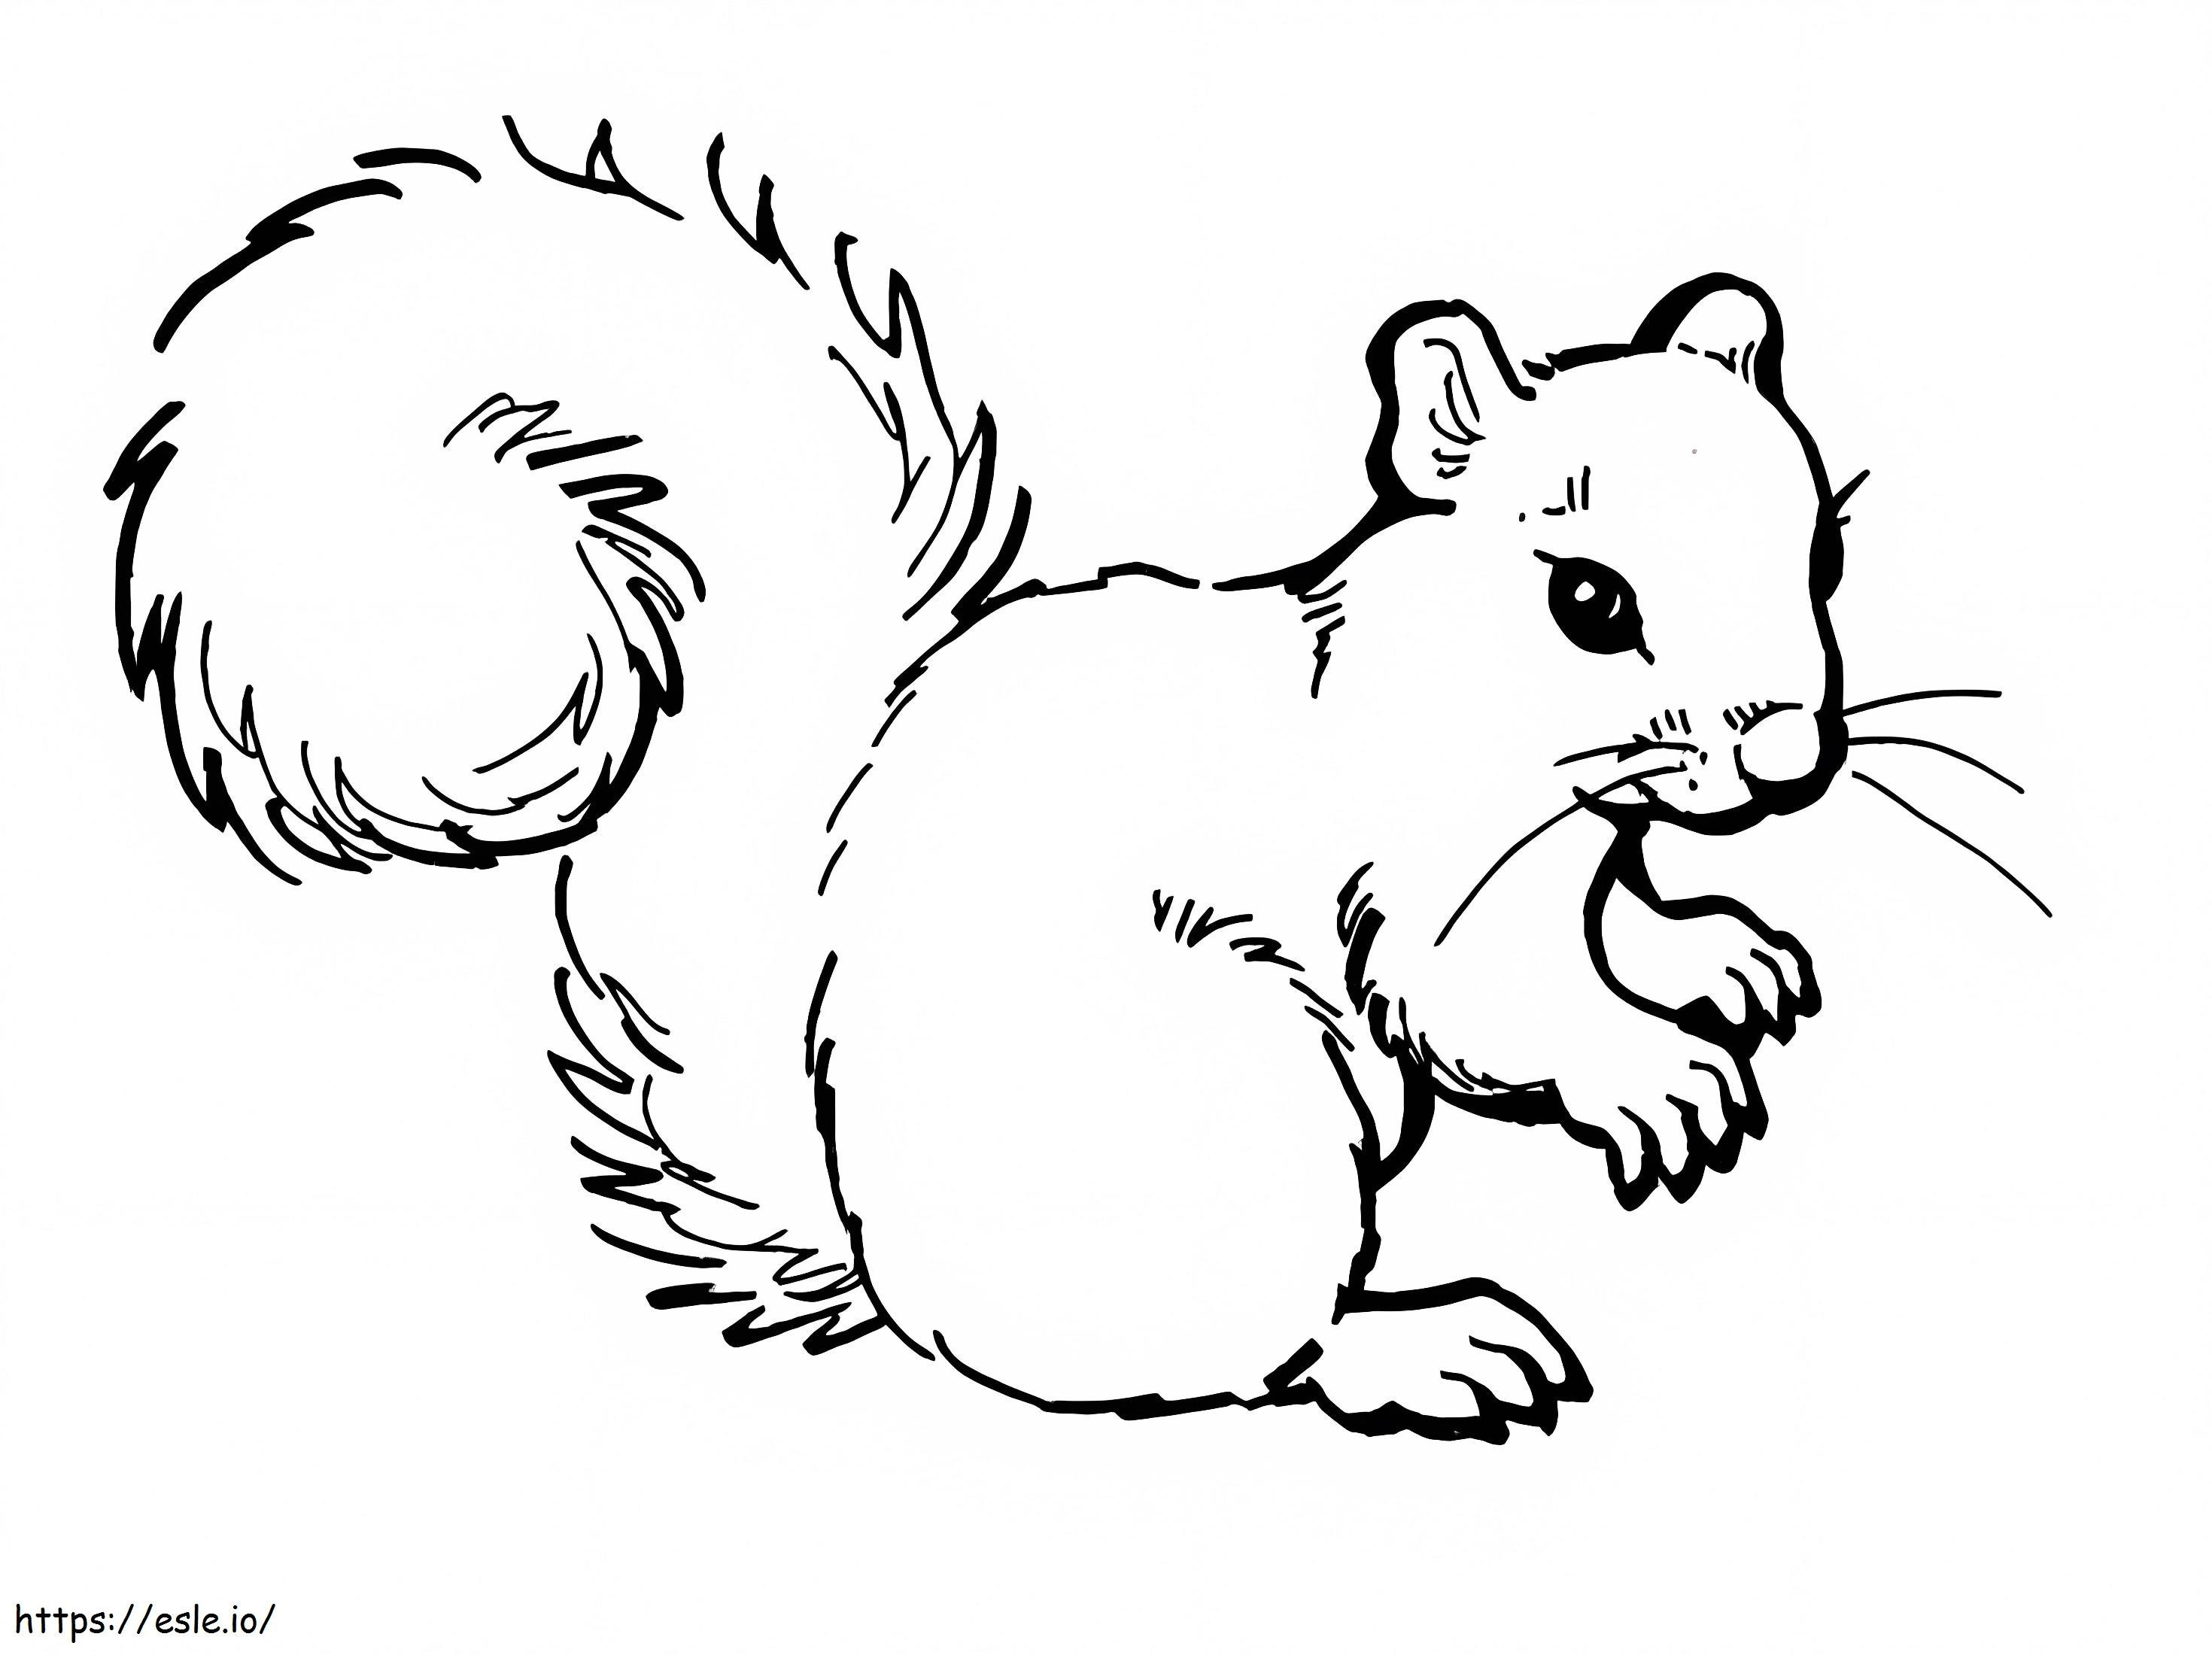 Basic Squirrel coloring page